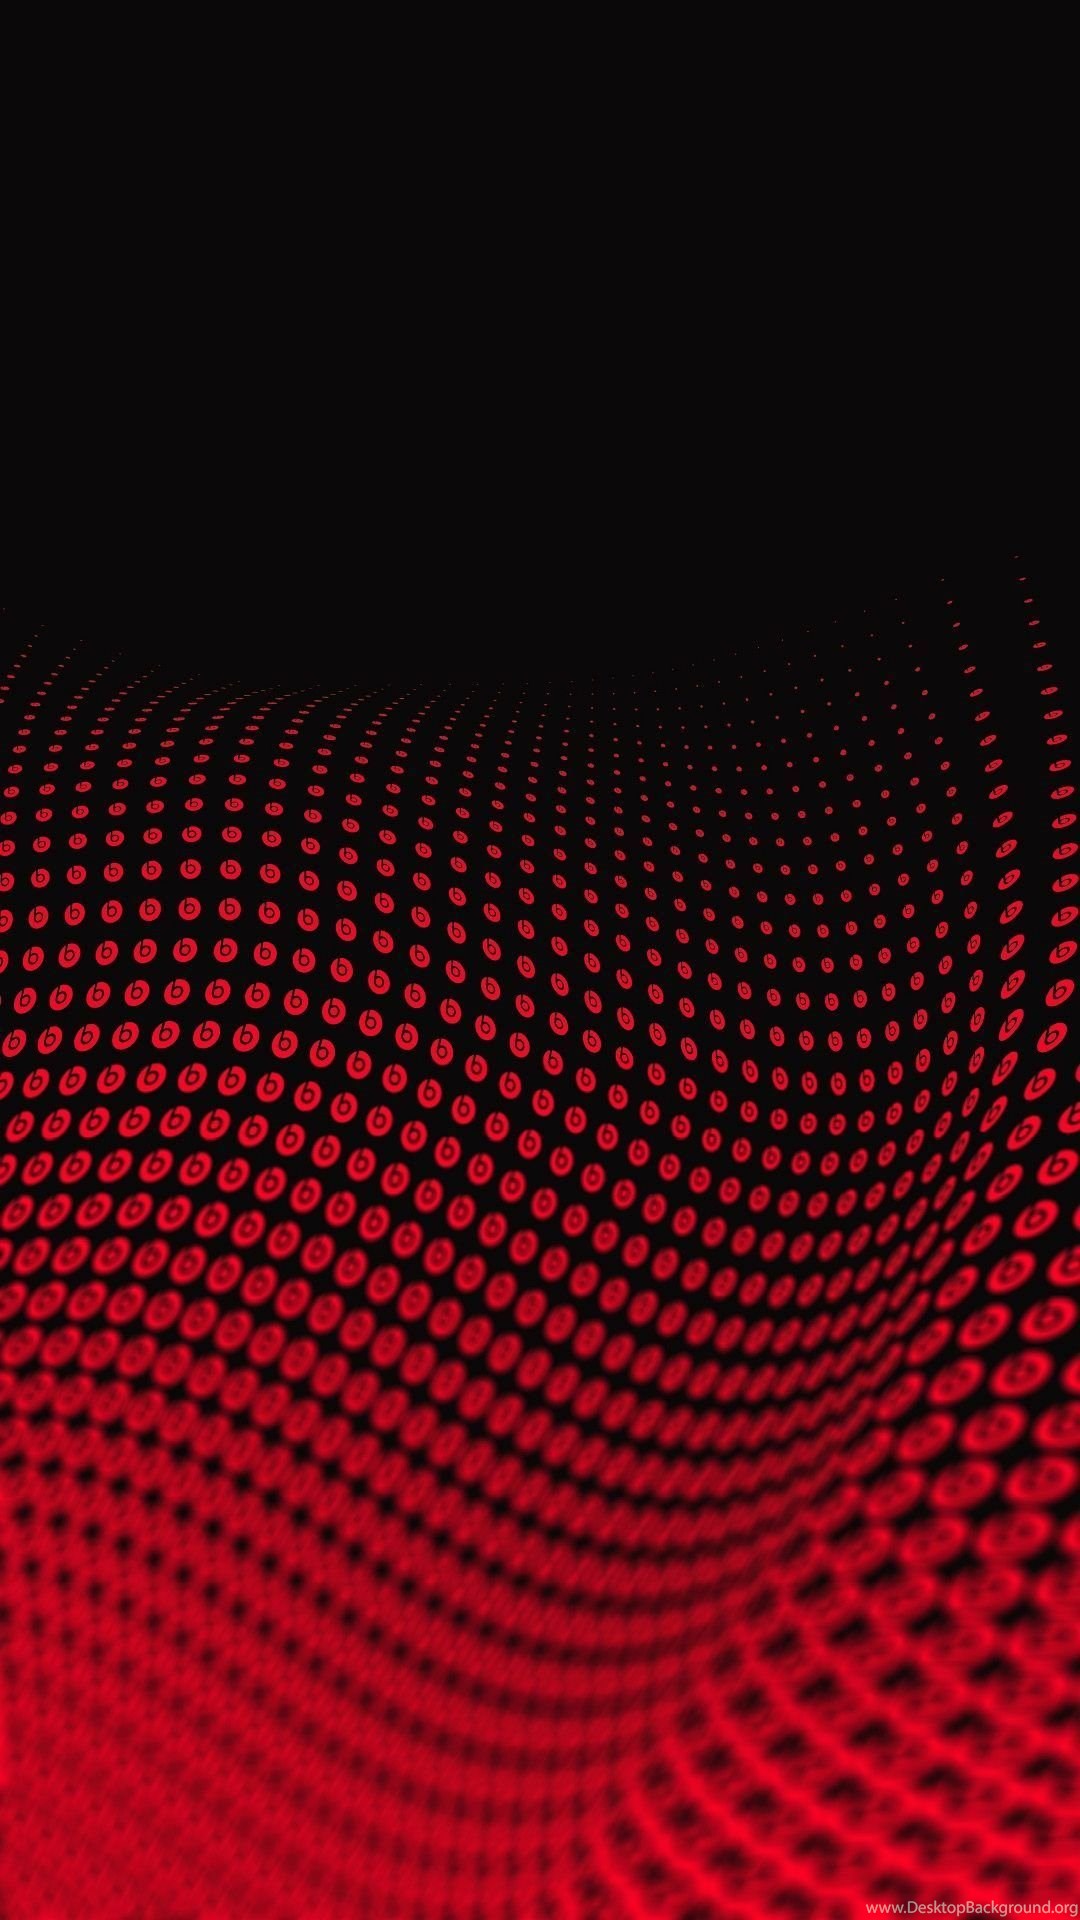 3d Wallpaper Black And Red Image Num 50